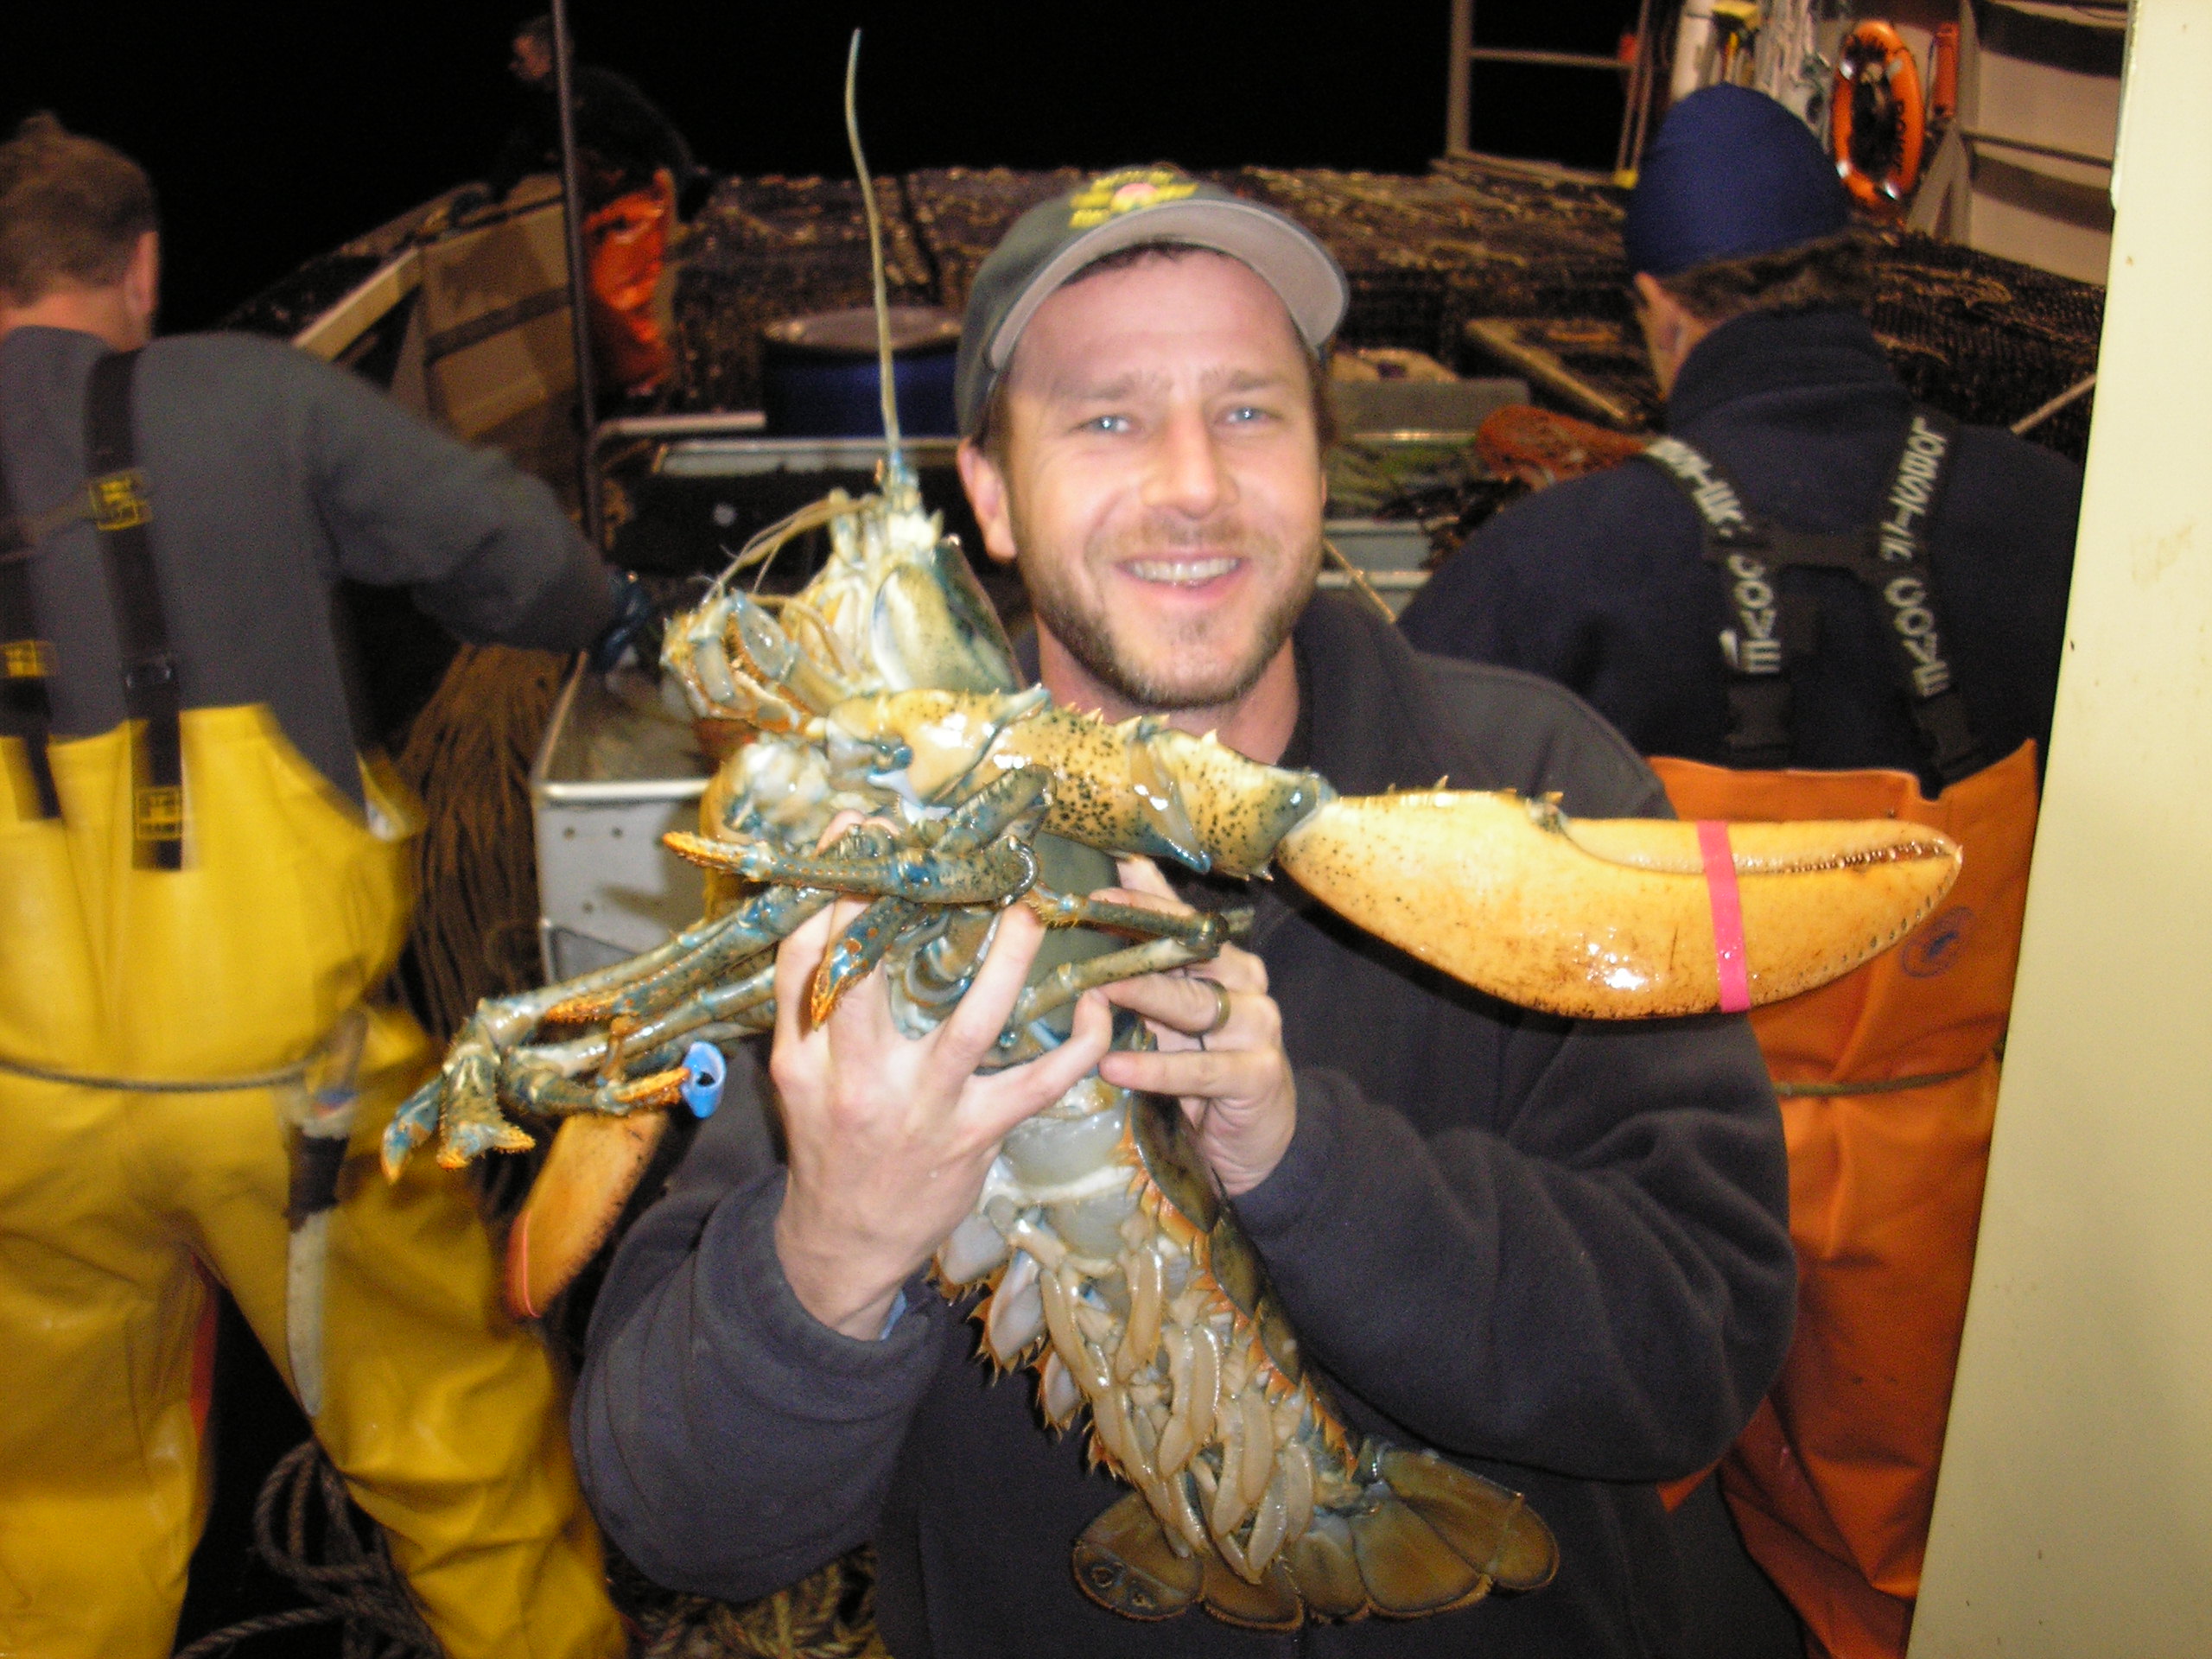 Lobster Wars / Original Productions / Discovery Network